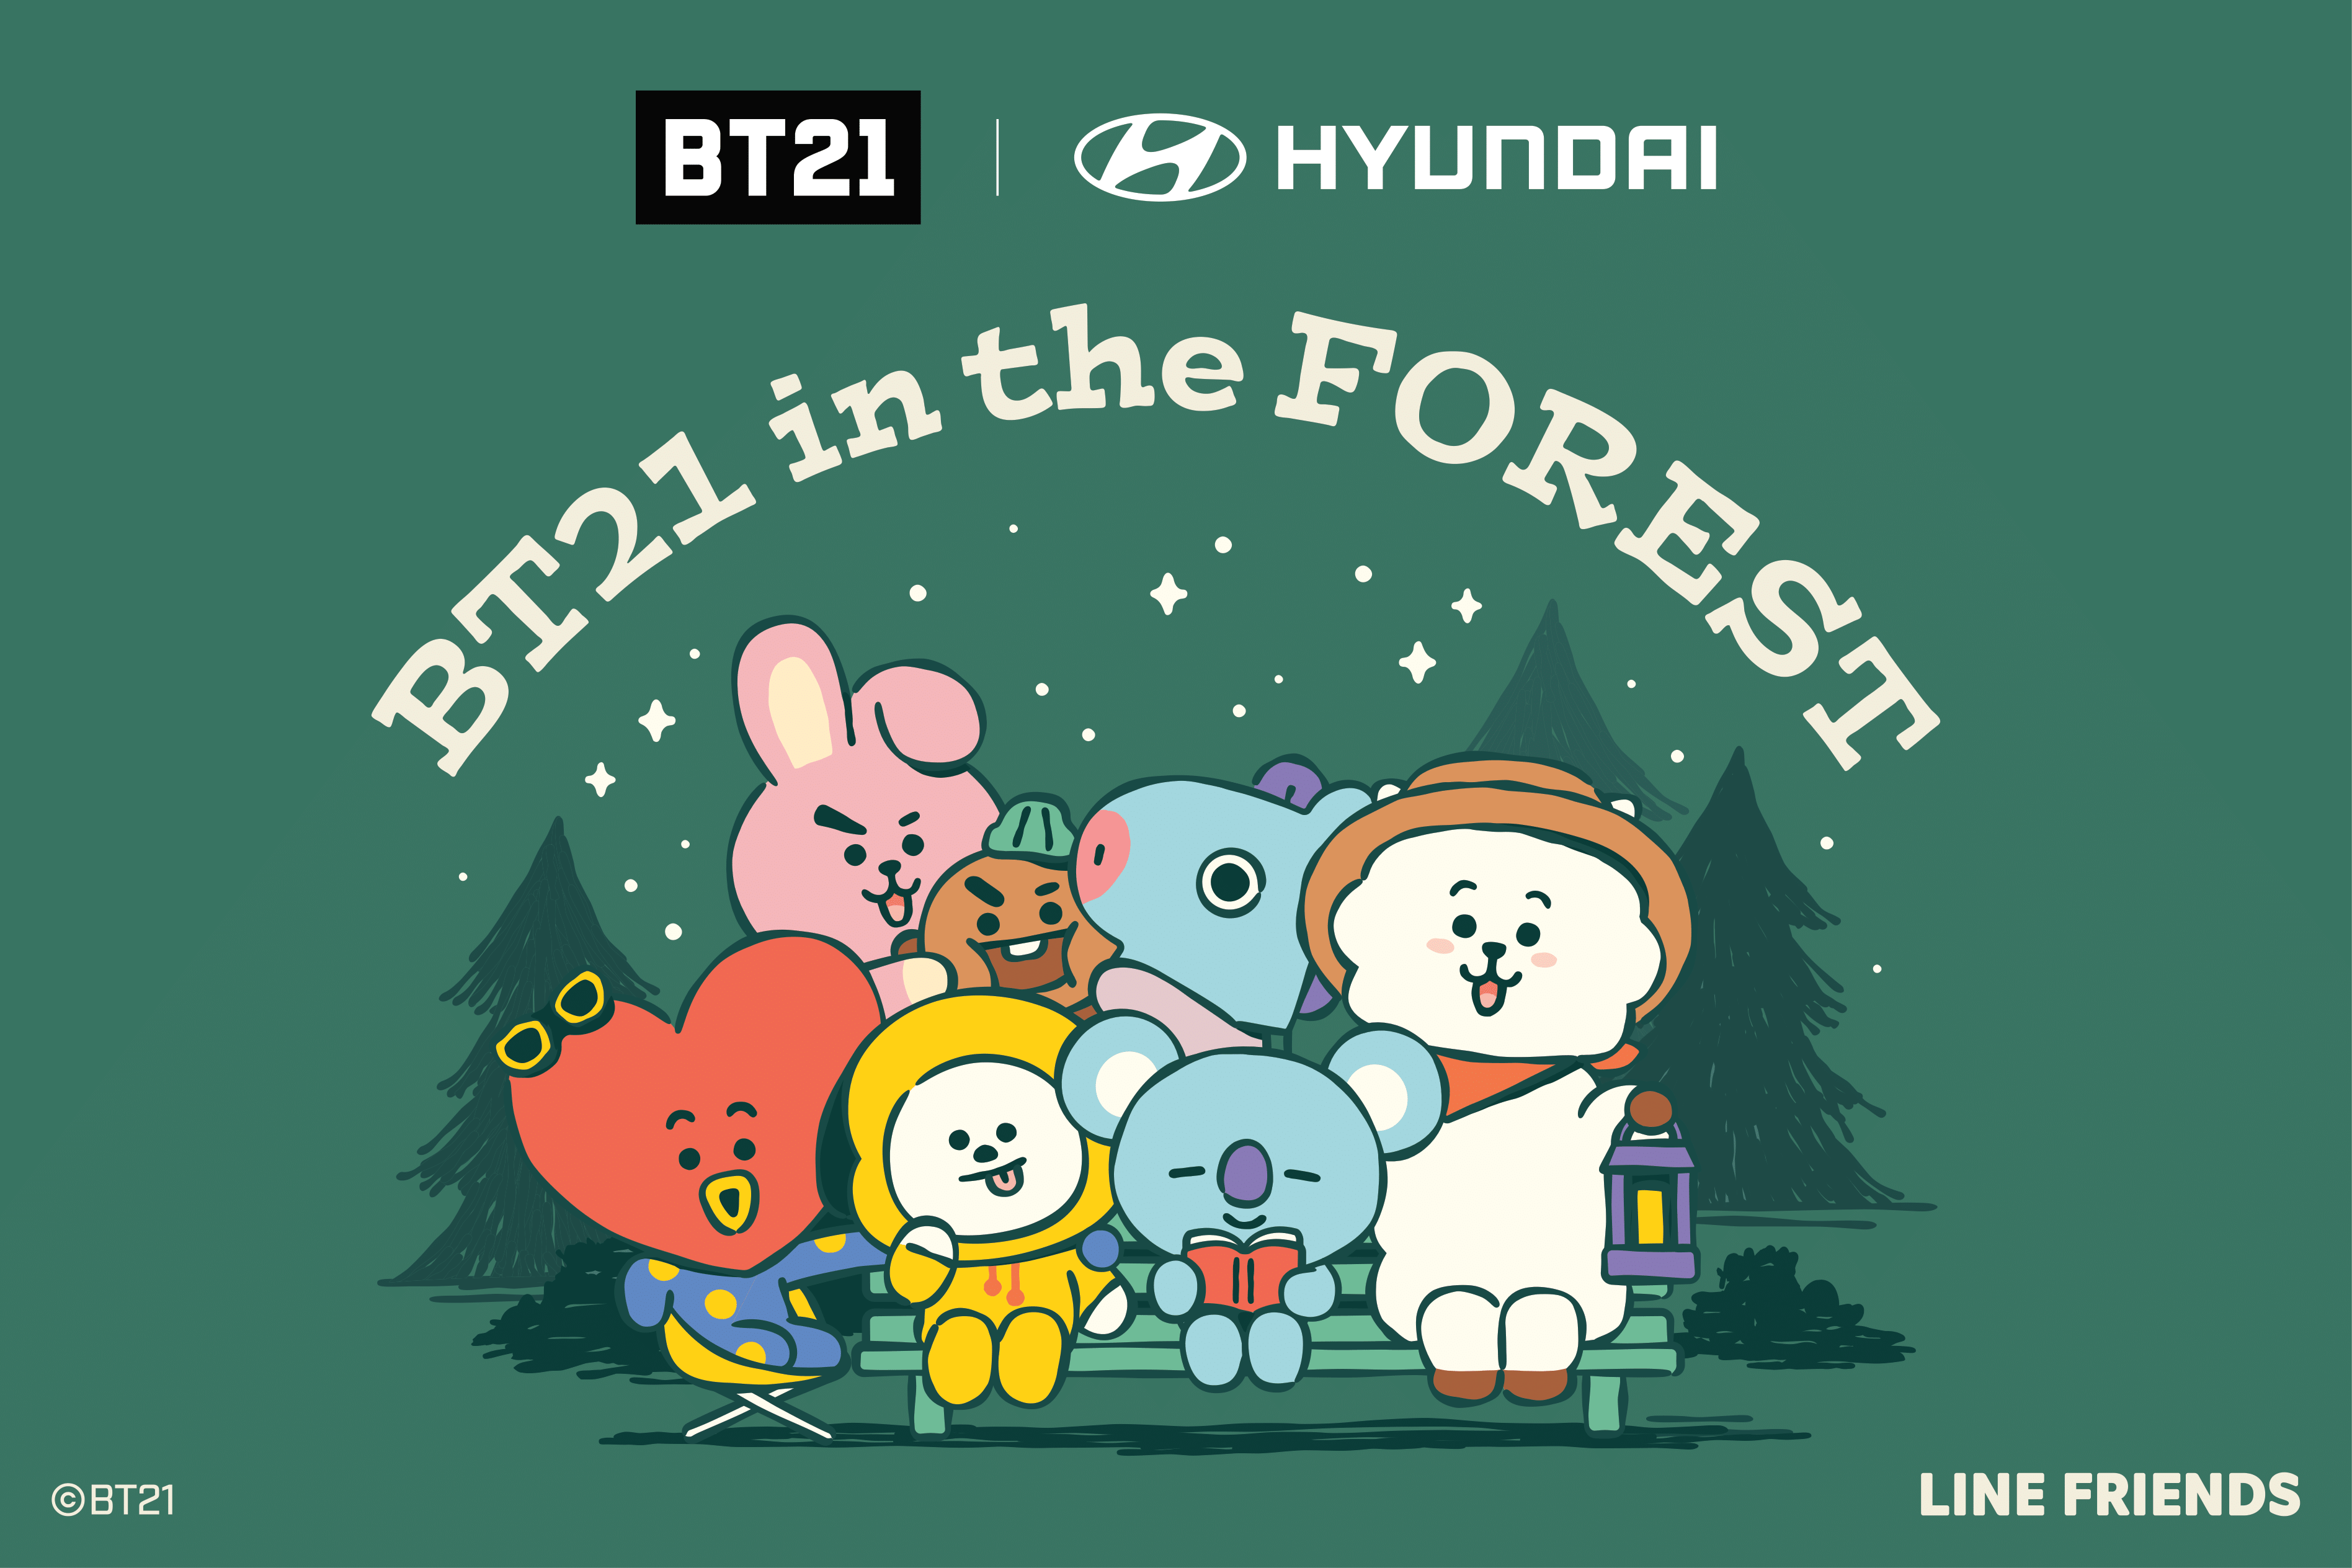 BT21 in the FOREST展示